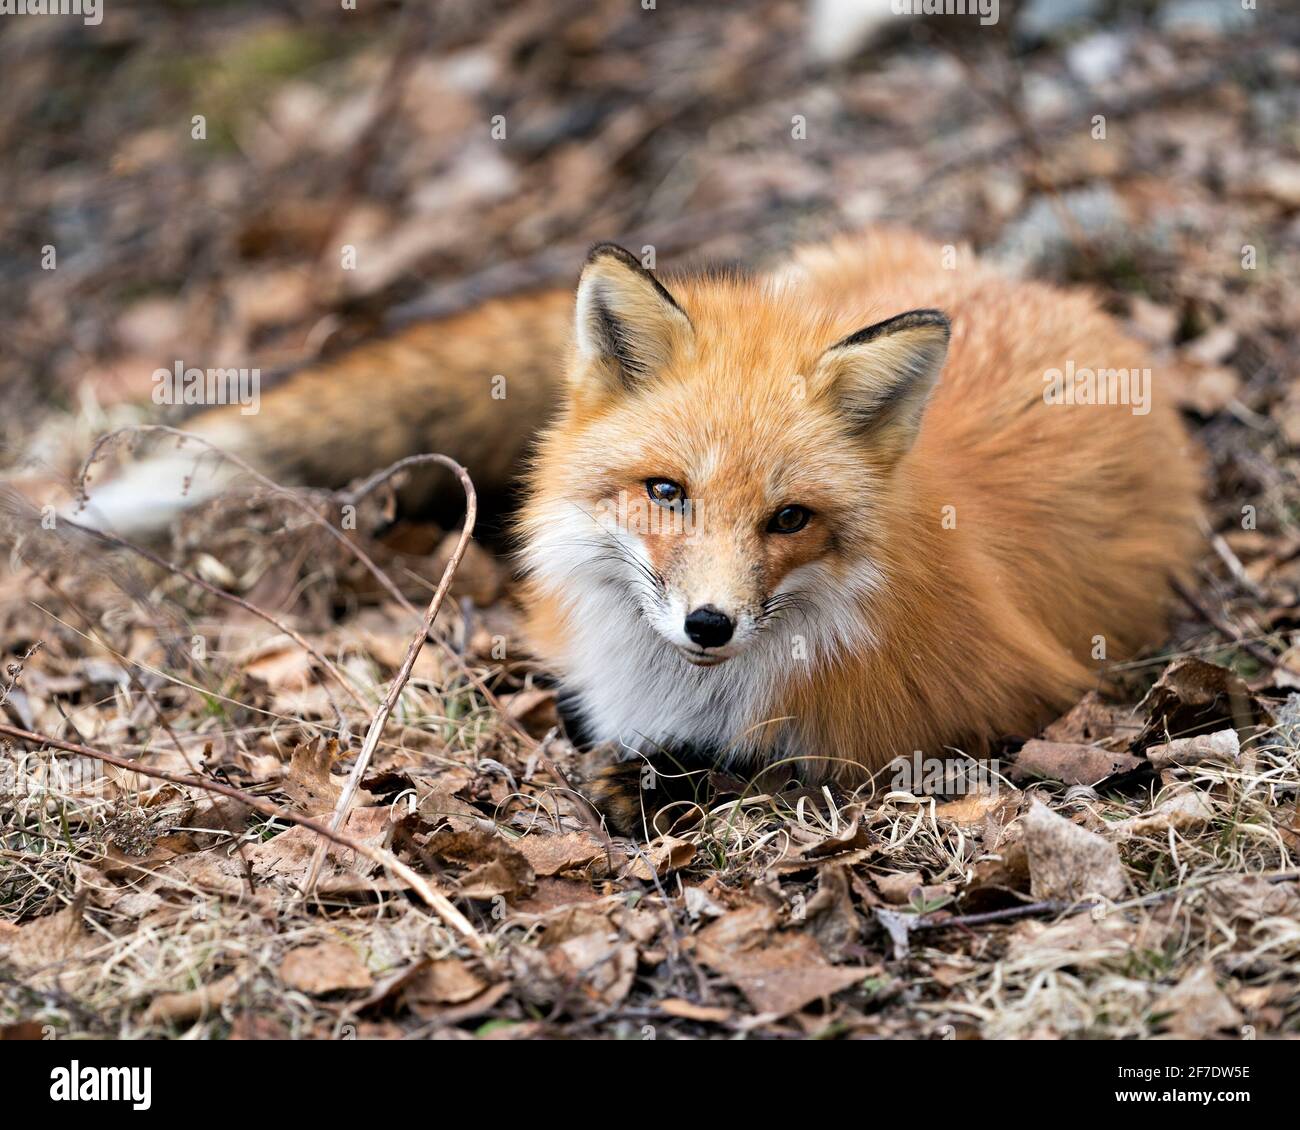 Red Fox Photo Stock. Fox Image. Close-up profile view,  laying down on brown leaves in the spring season with a blur background in its environment. Stock Photo